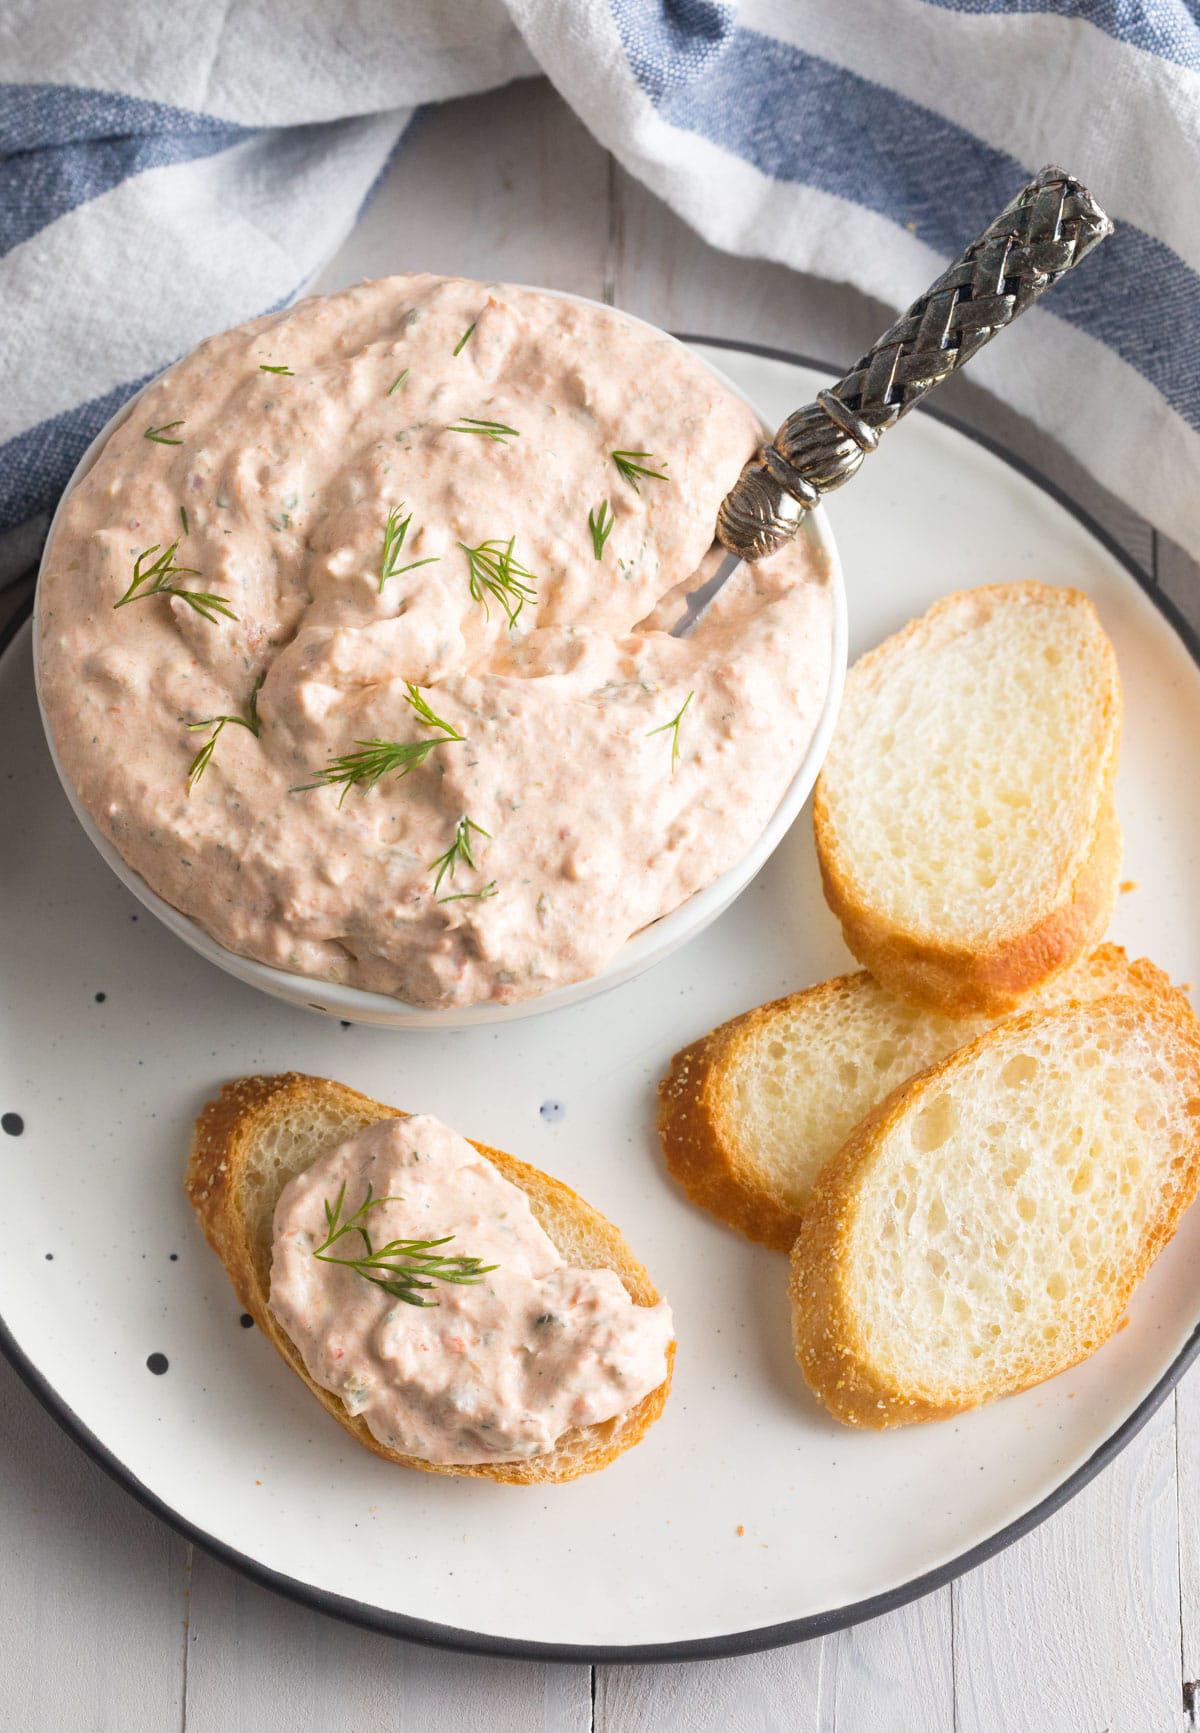 This low-carb dip mixes smoked salmon, dill, cream cheese, and lemon juice. It will go perfectly with some toasted bread for an easily-to-handle lunch at your disk. (via <strong><a href="https://www.aspicyperspective.com/smoked-salmon-dip-recipe/">A Spicy Perspective</a></strong>)